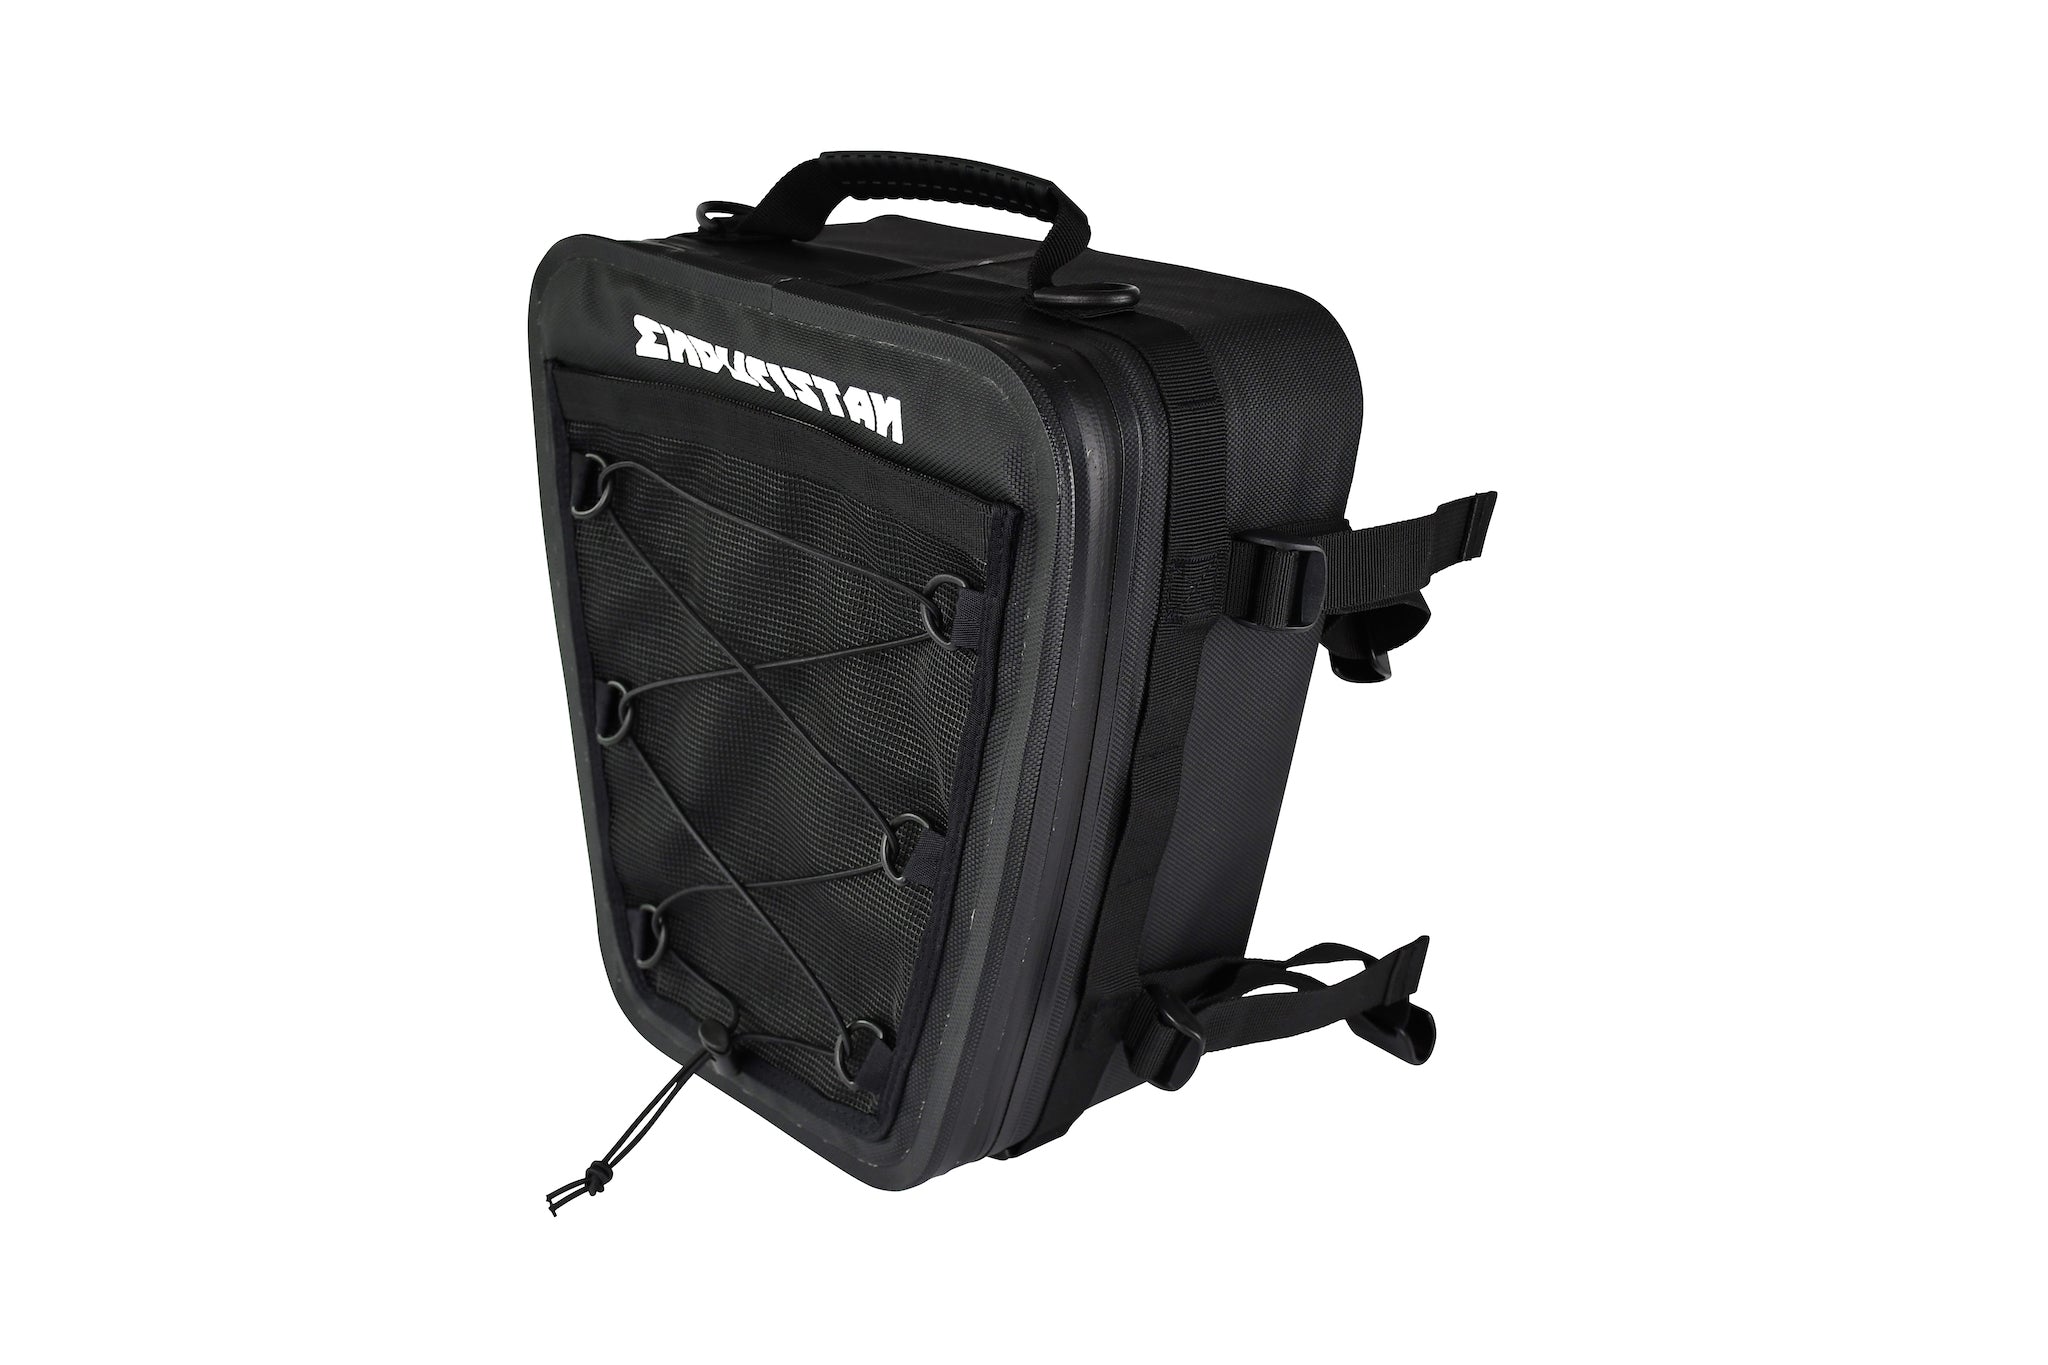 Hecktasche Tail Pack - Large